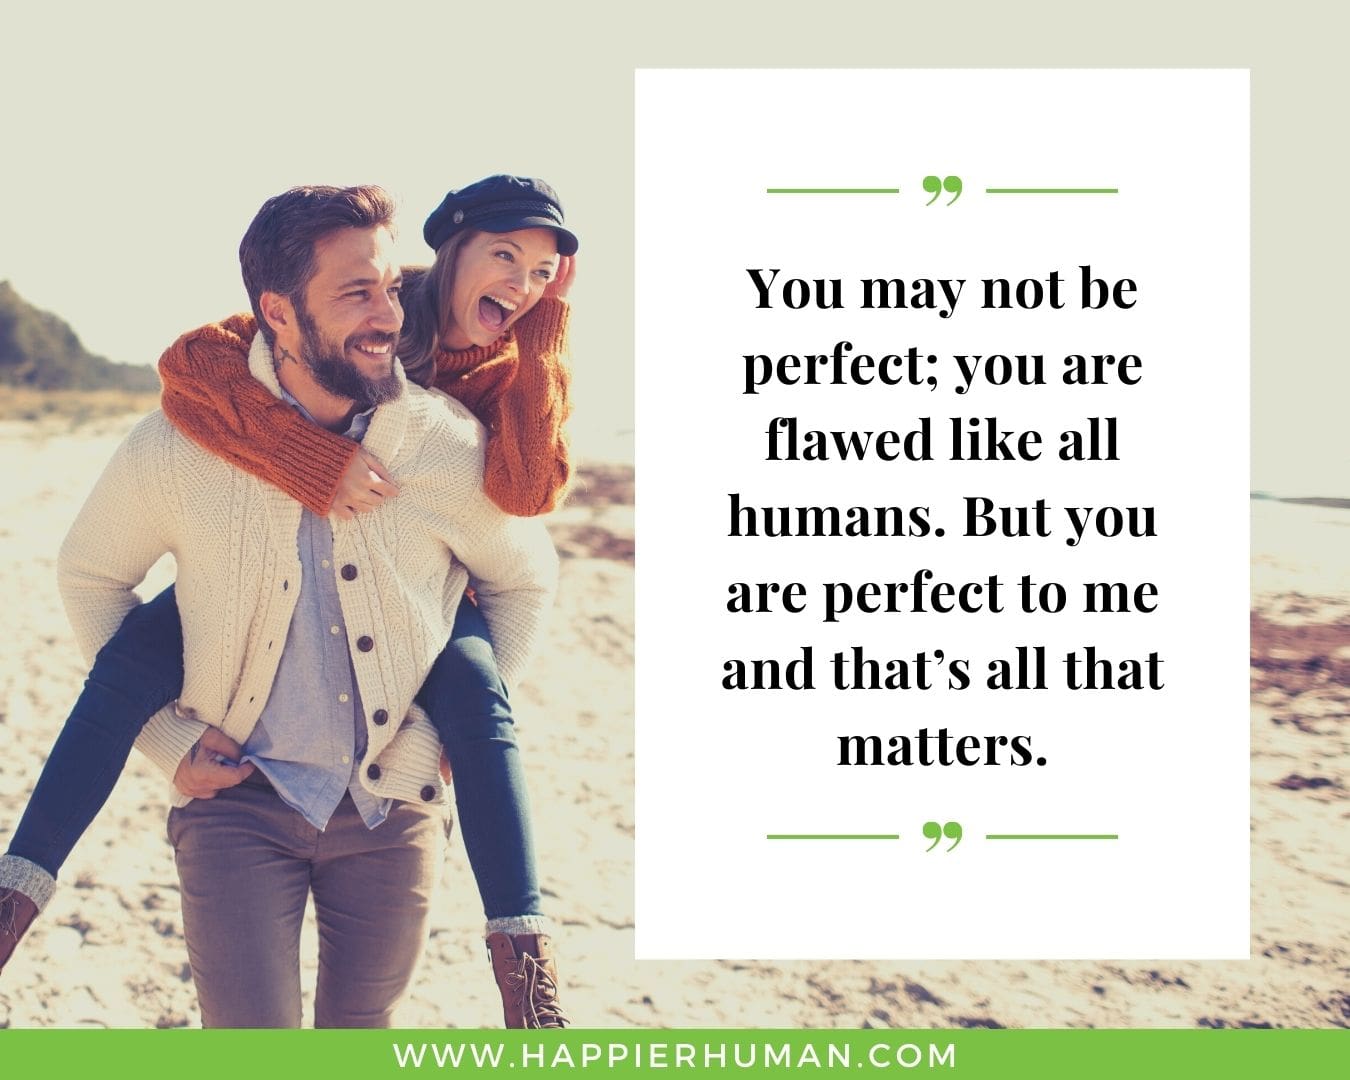 Unconditional Love Quotes for Her - “You may not be perfect; you are flawed like all humans. But you are perfect to me and that’s all that matters.”